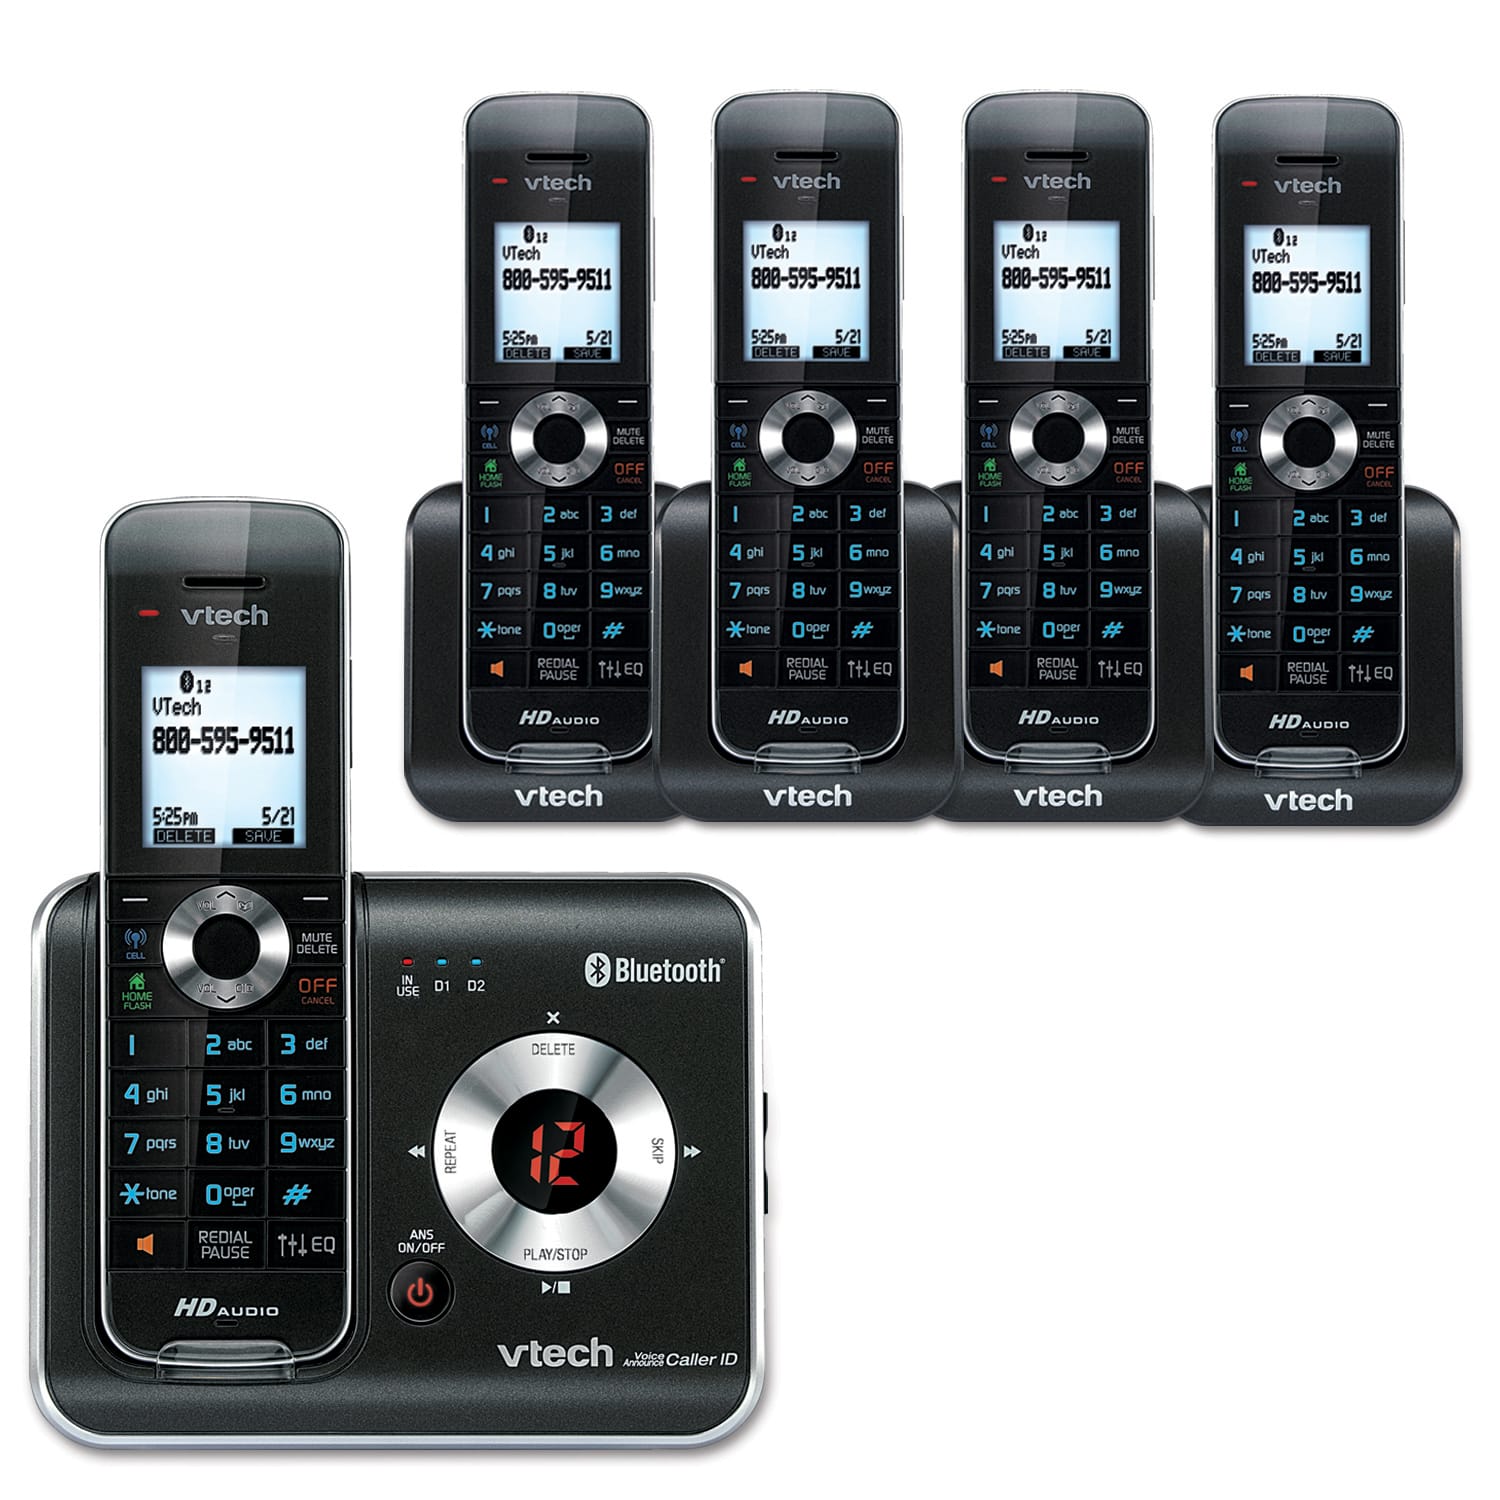 DS3111-2 Vtech 6.0 DS3111-2 Cordless Phone System Lot of 2/ 4 Phones Total 